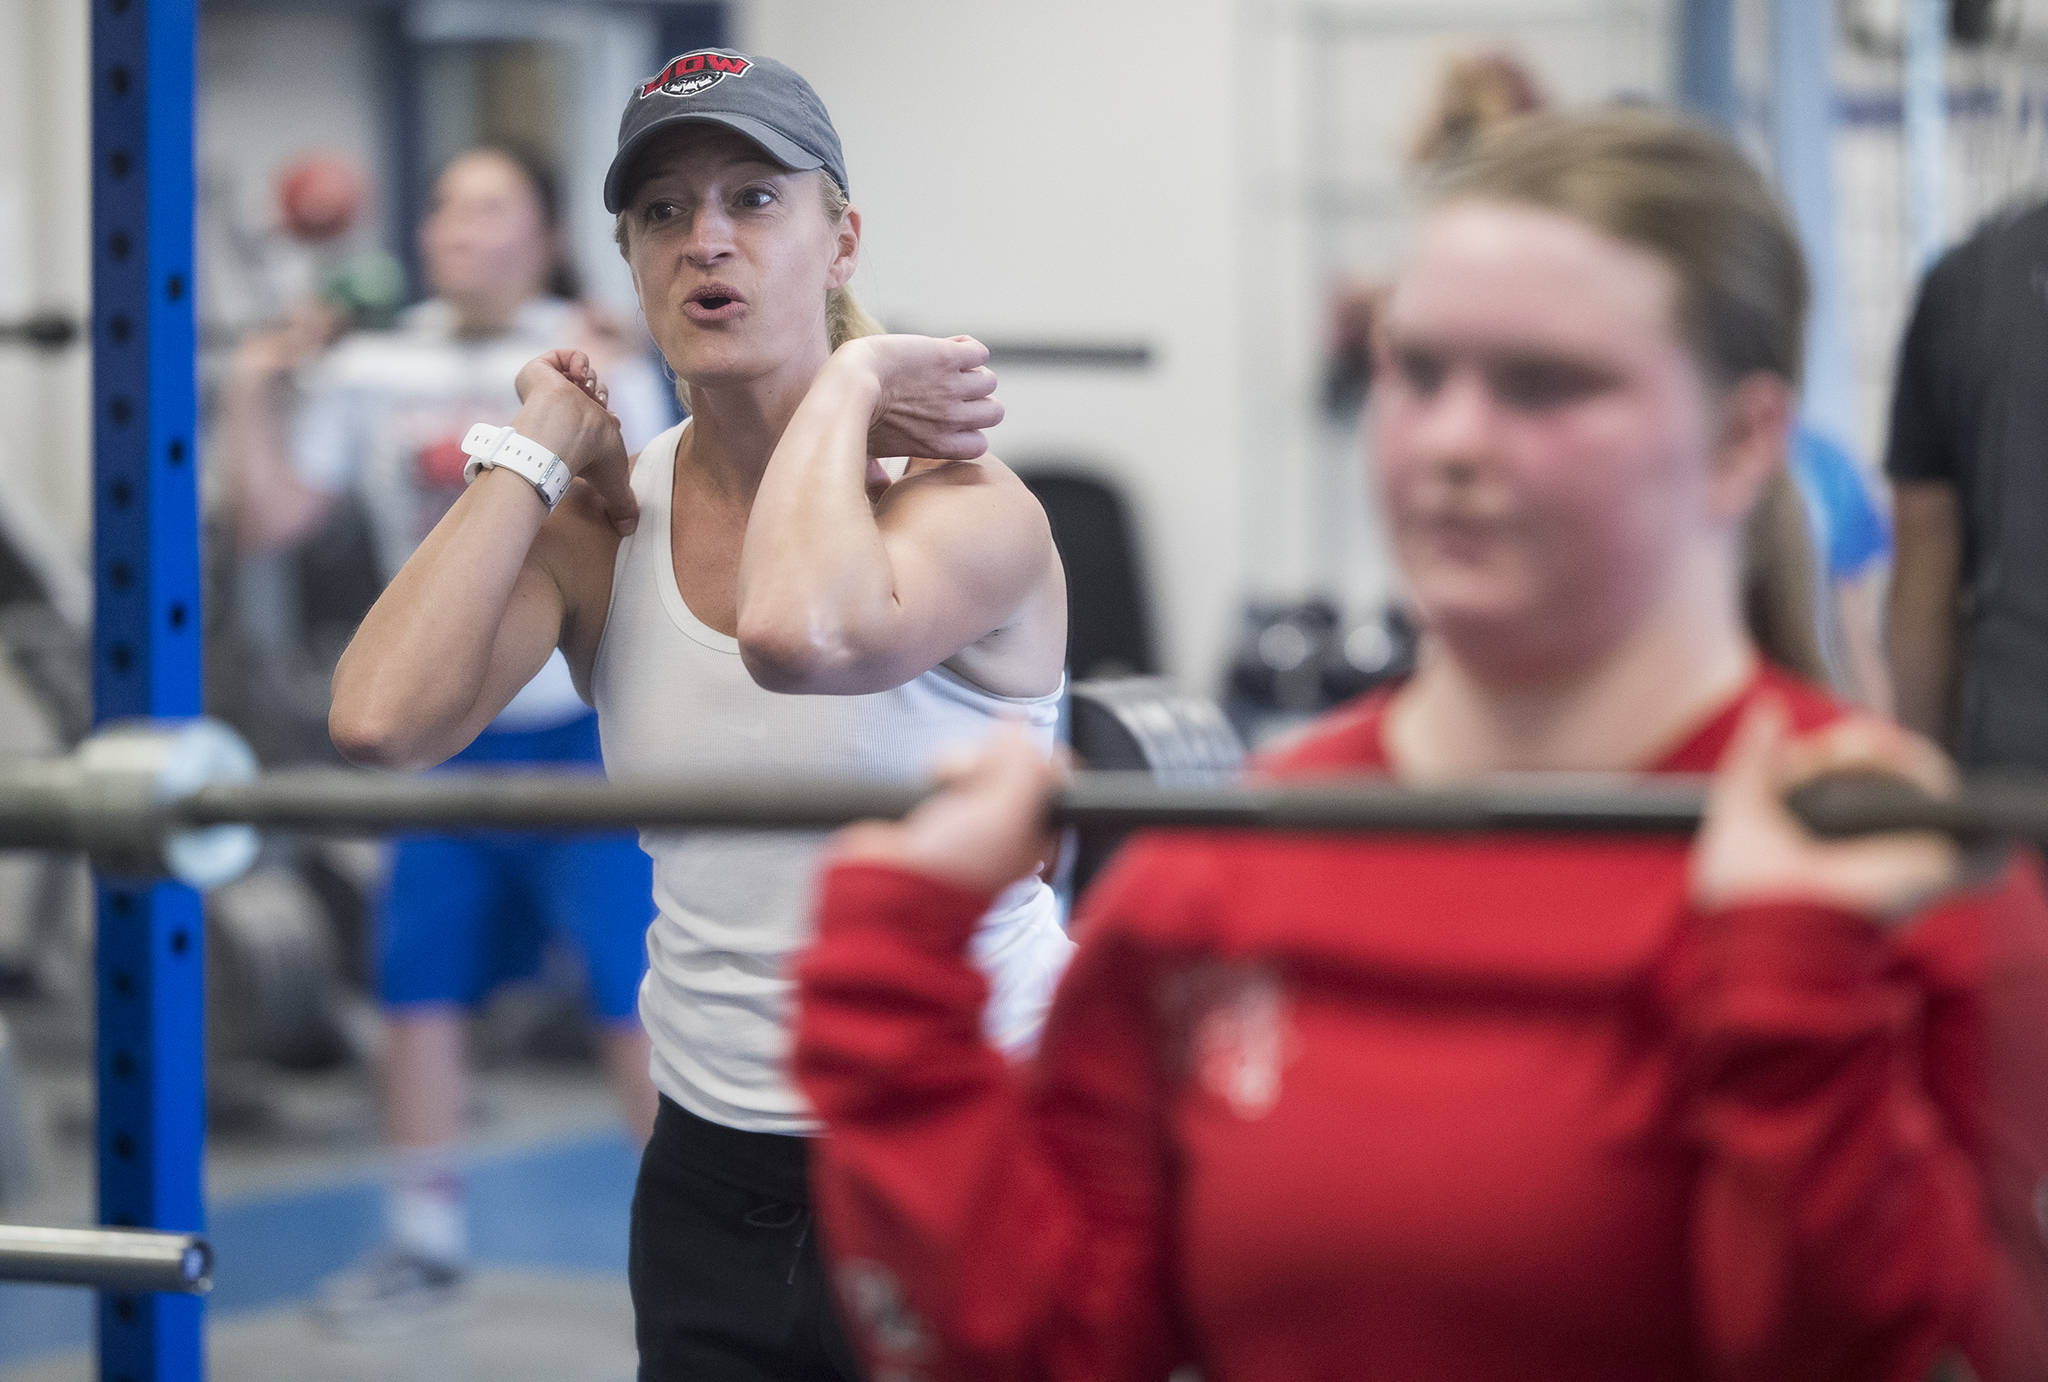 Cori Metzgar, Director of Sports Performance at Western Oregon University and host of the Juneau Football and Sports Performance Camp, gives Ariana Connally encouragement lifting weights at the Thunder Mountain High School on Tuesday, July 11, 2017. (Michael Penn | Juneau Empire File)